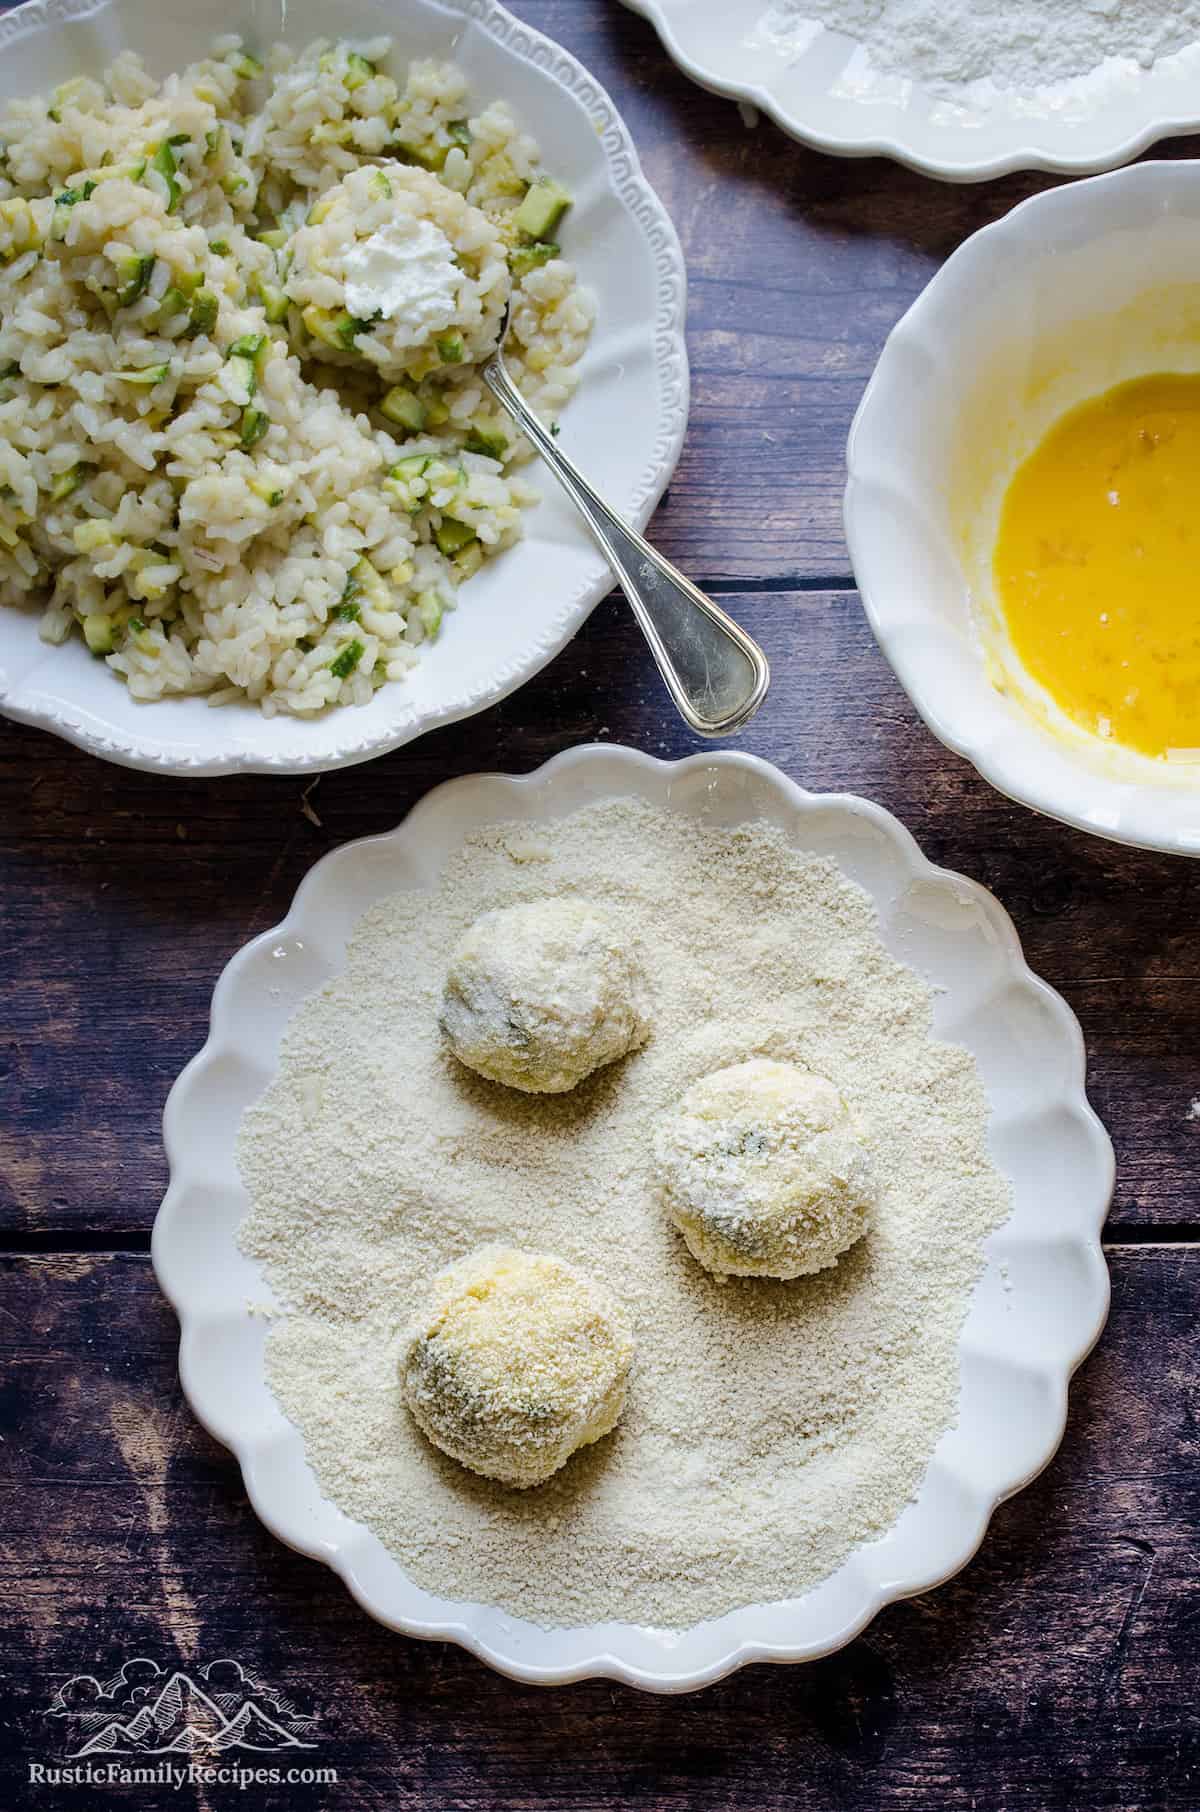 Three risotto balls rolled in a dish full of breadcrumbs.